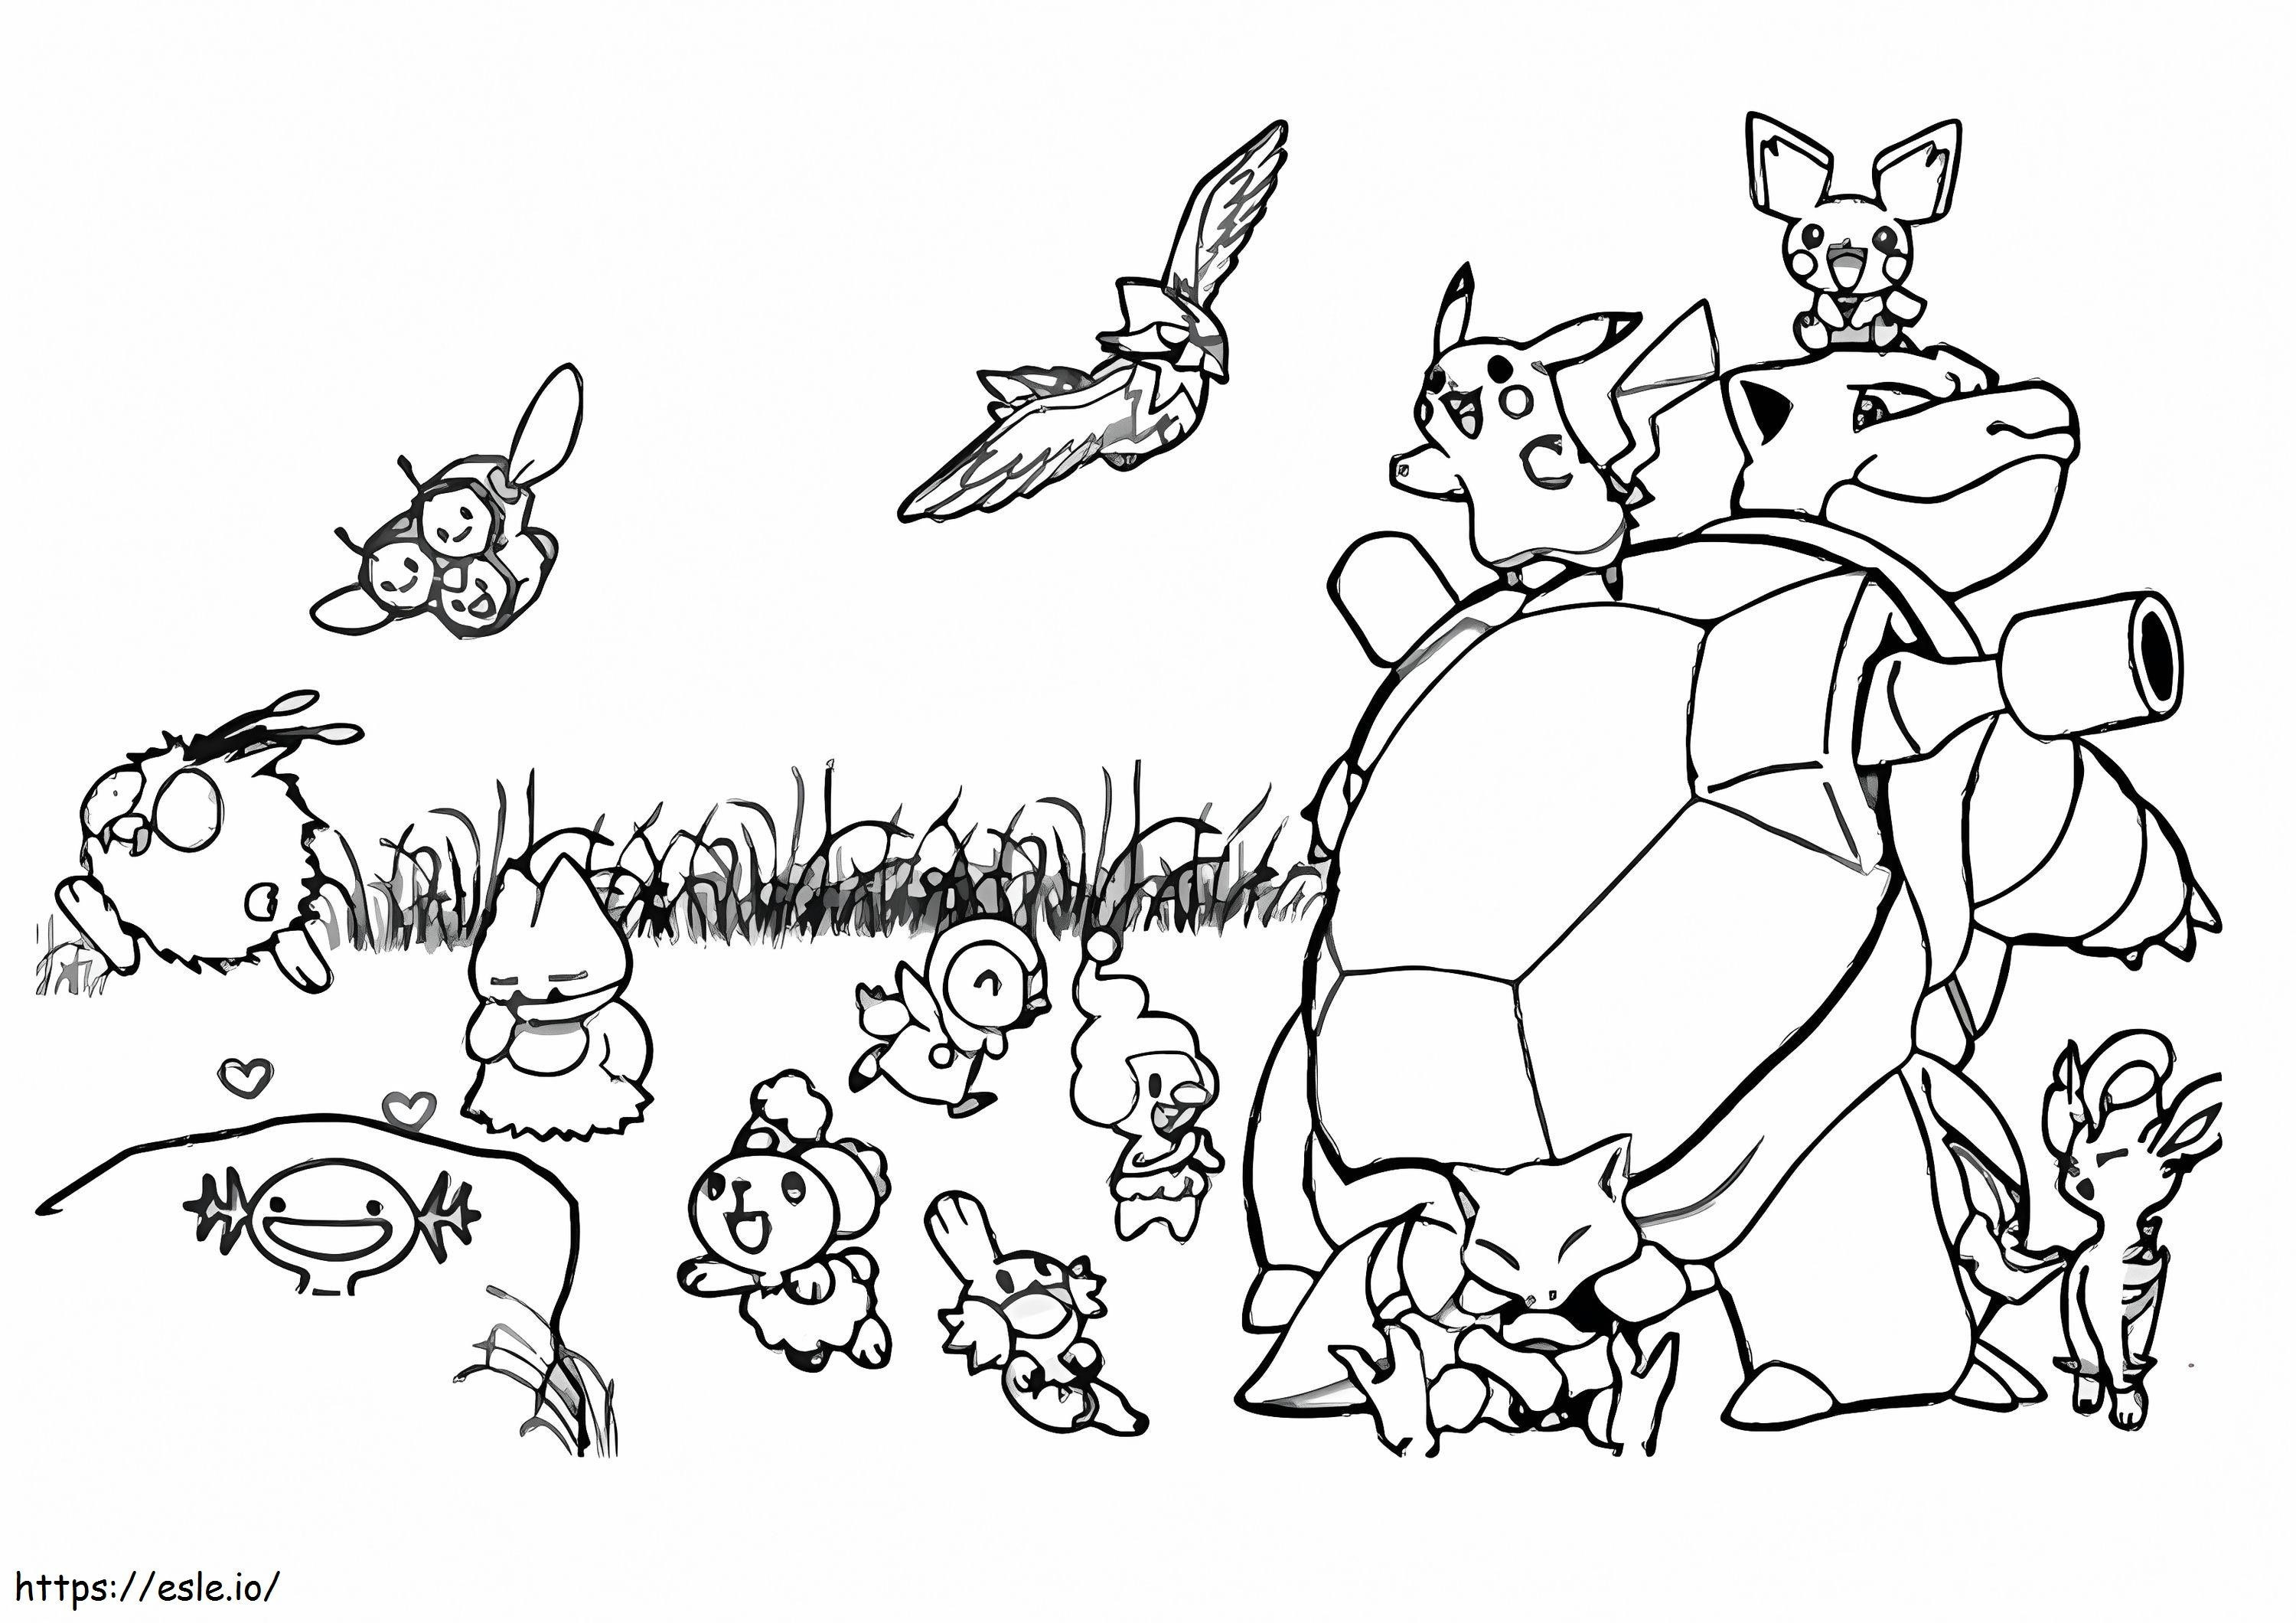 1528282008 Pikachu And Blastoise A4 E1600650157277 coloring page